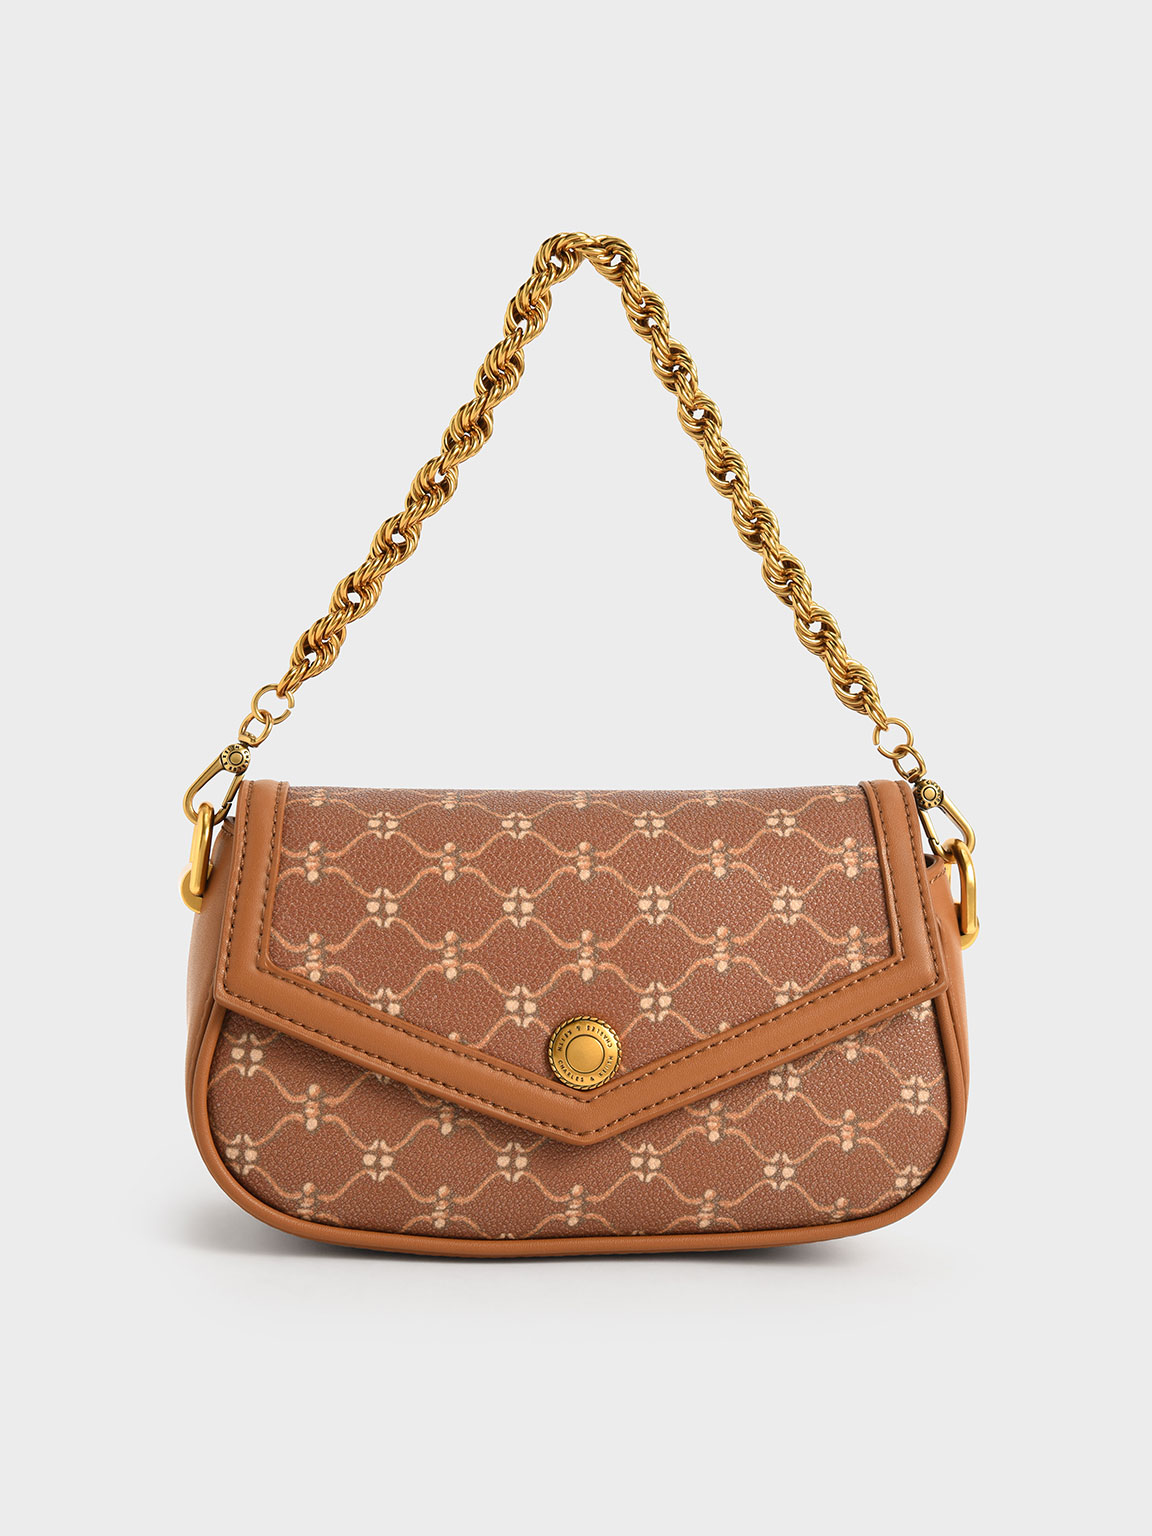  Fossil Satchel, Brown Chain Print : Clothing, Shoes & Jewelry